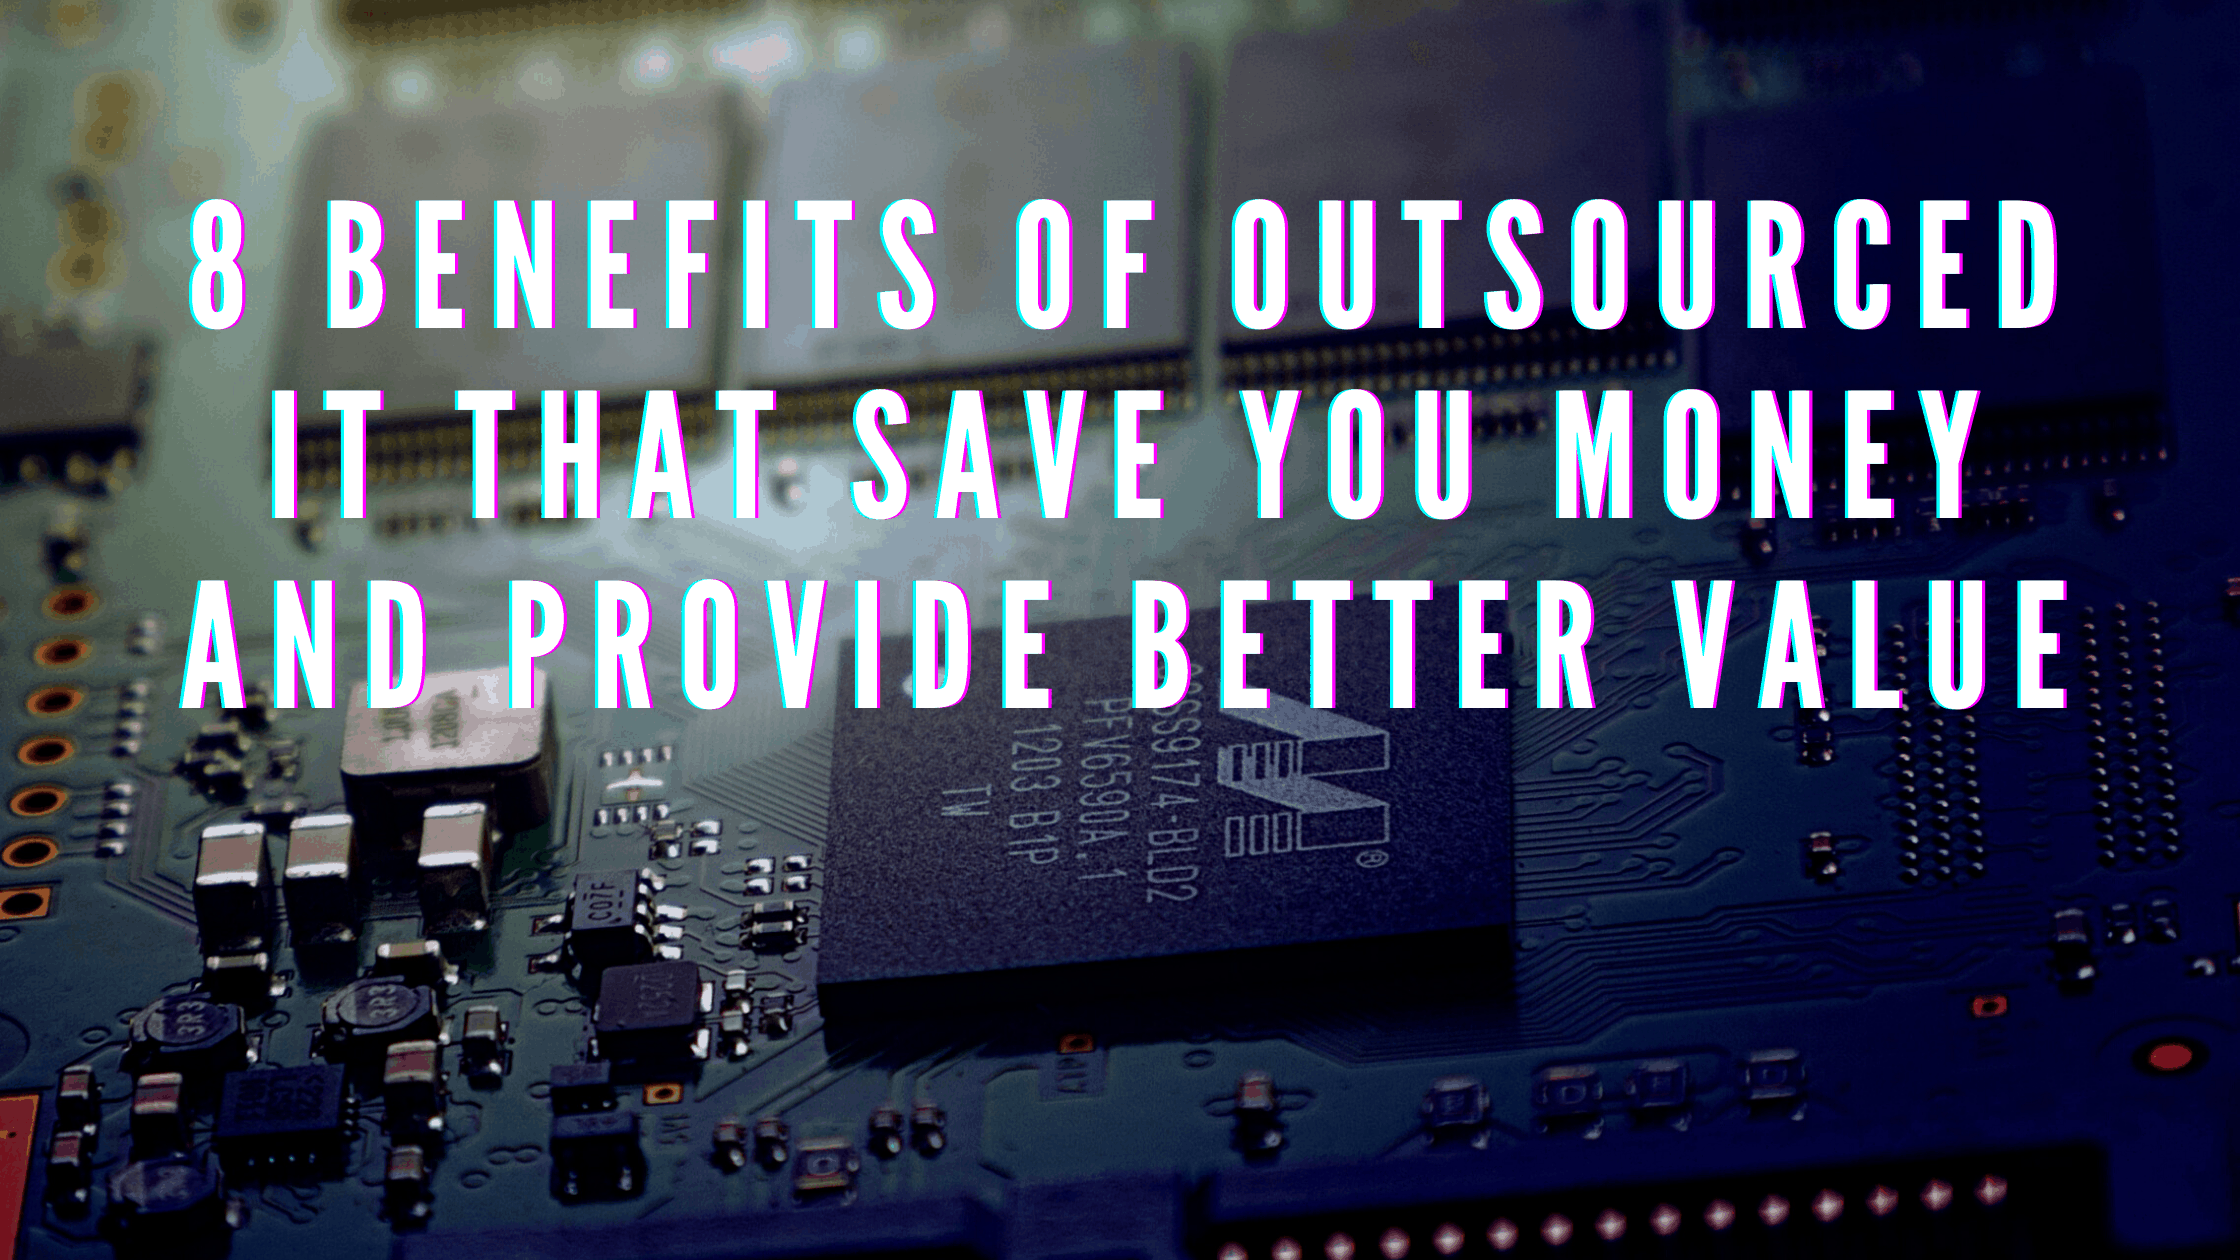 8 Benefits to Outsourced IT